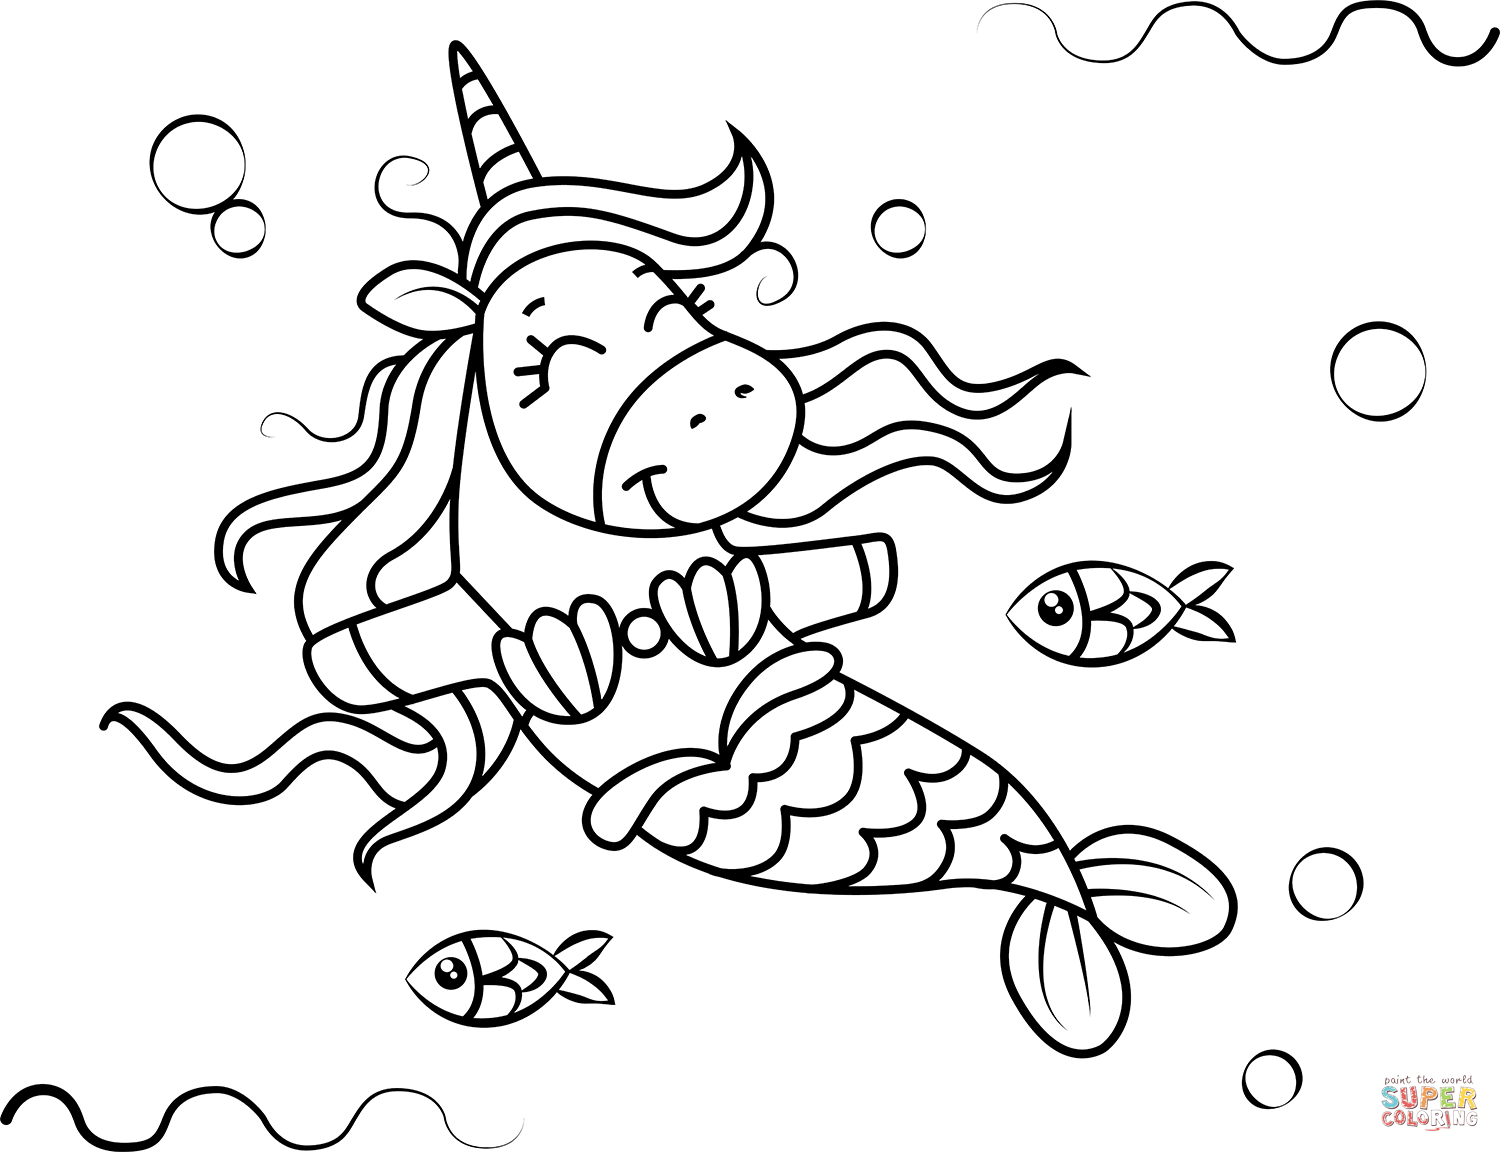 Unicorn Mermaid coloring page | Free Printable Coloring Pages